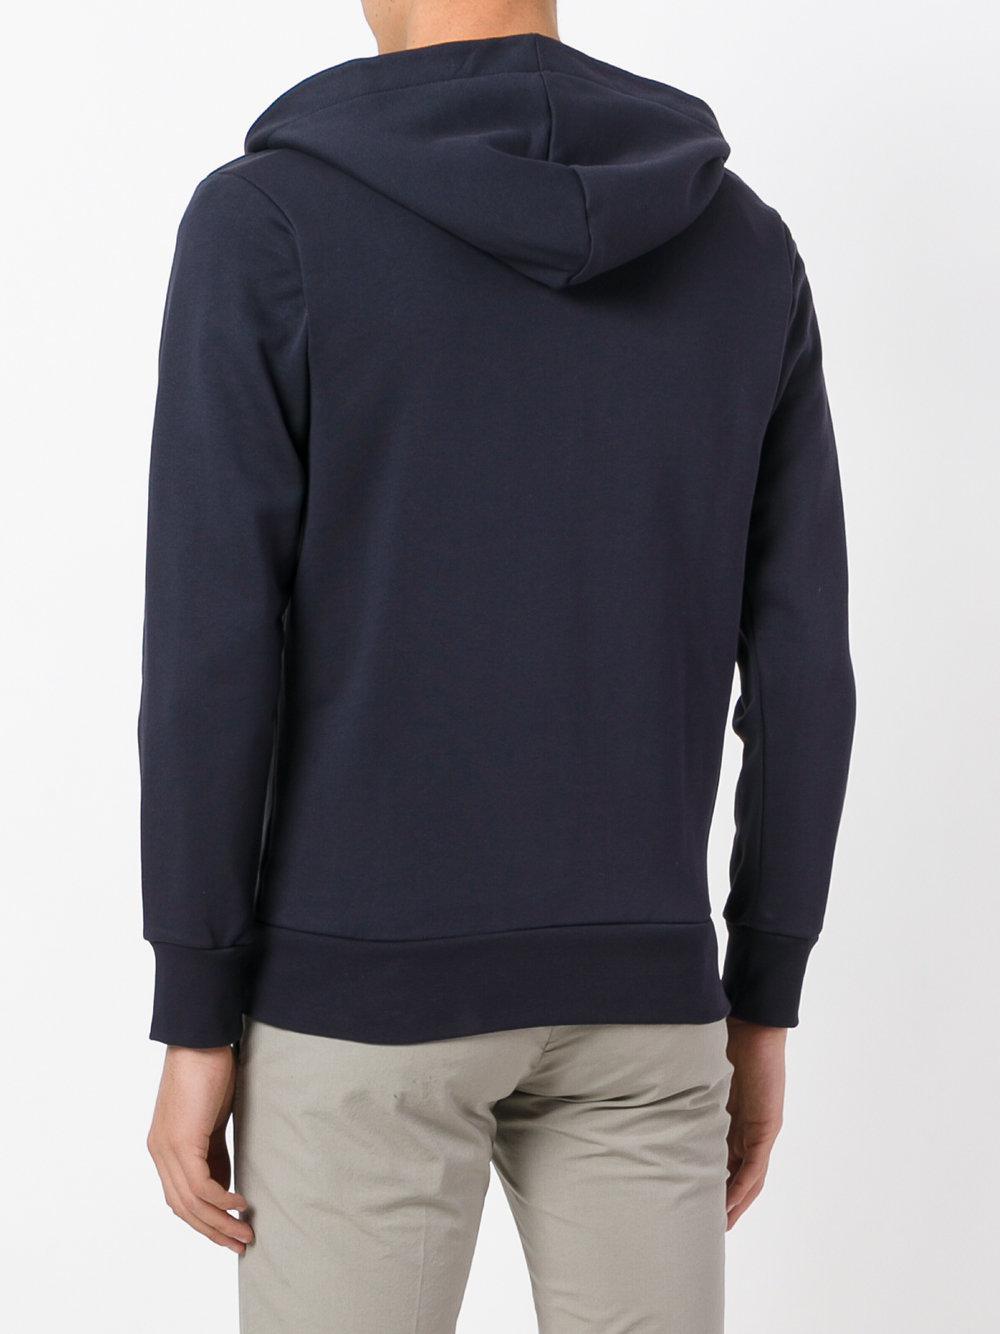 Palm Angels Cotton Embellished Zip Hoodie in Navy (Blue) for Men - Lyst